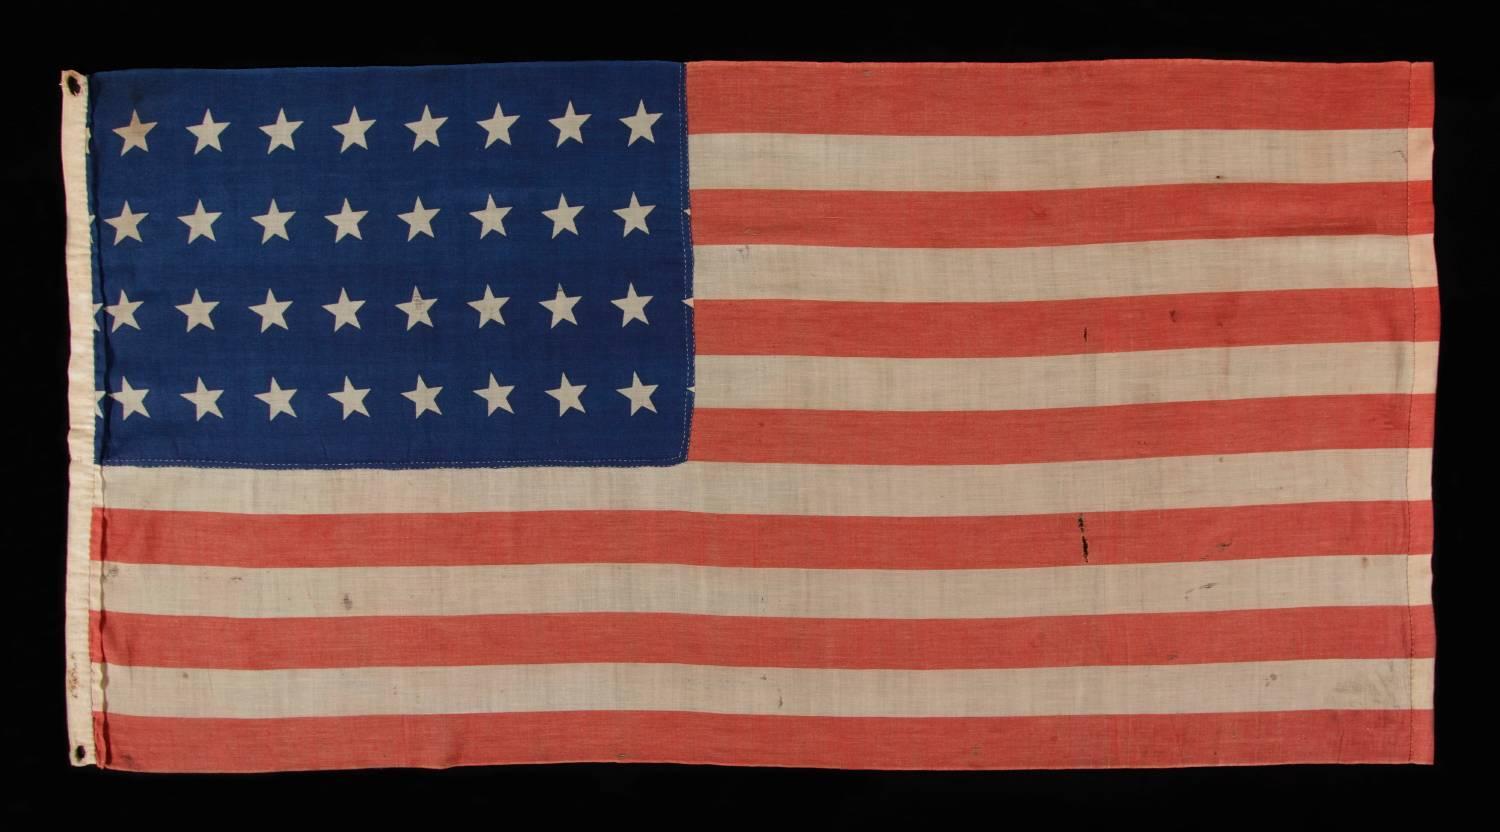 32 STAR ANTIQUE AMERICAN FLAG, REPRESENTING MINNESOTA STATEHOOD, 1858-59, IN A STYLE KNOWN TO HAVE SEEN MILITARY SERVICE DURING THE FORTHCOMING CIVIL WAR (1861-65) AND BEARING THE SIGNATURE OF A SOLDIER WHO FOUGHT WITH THE 15TH MICHIGAN INFANTRY,